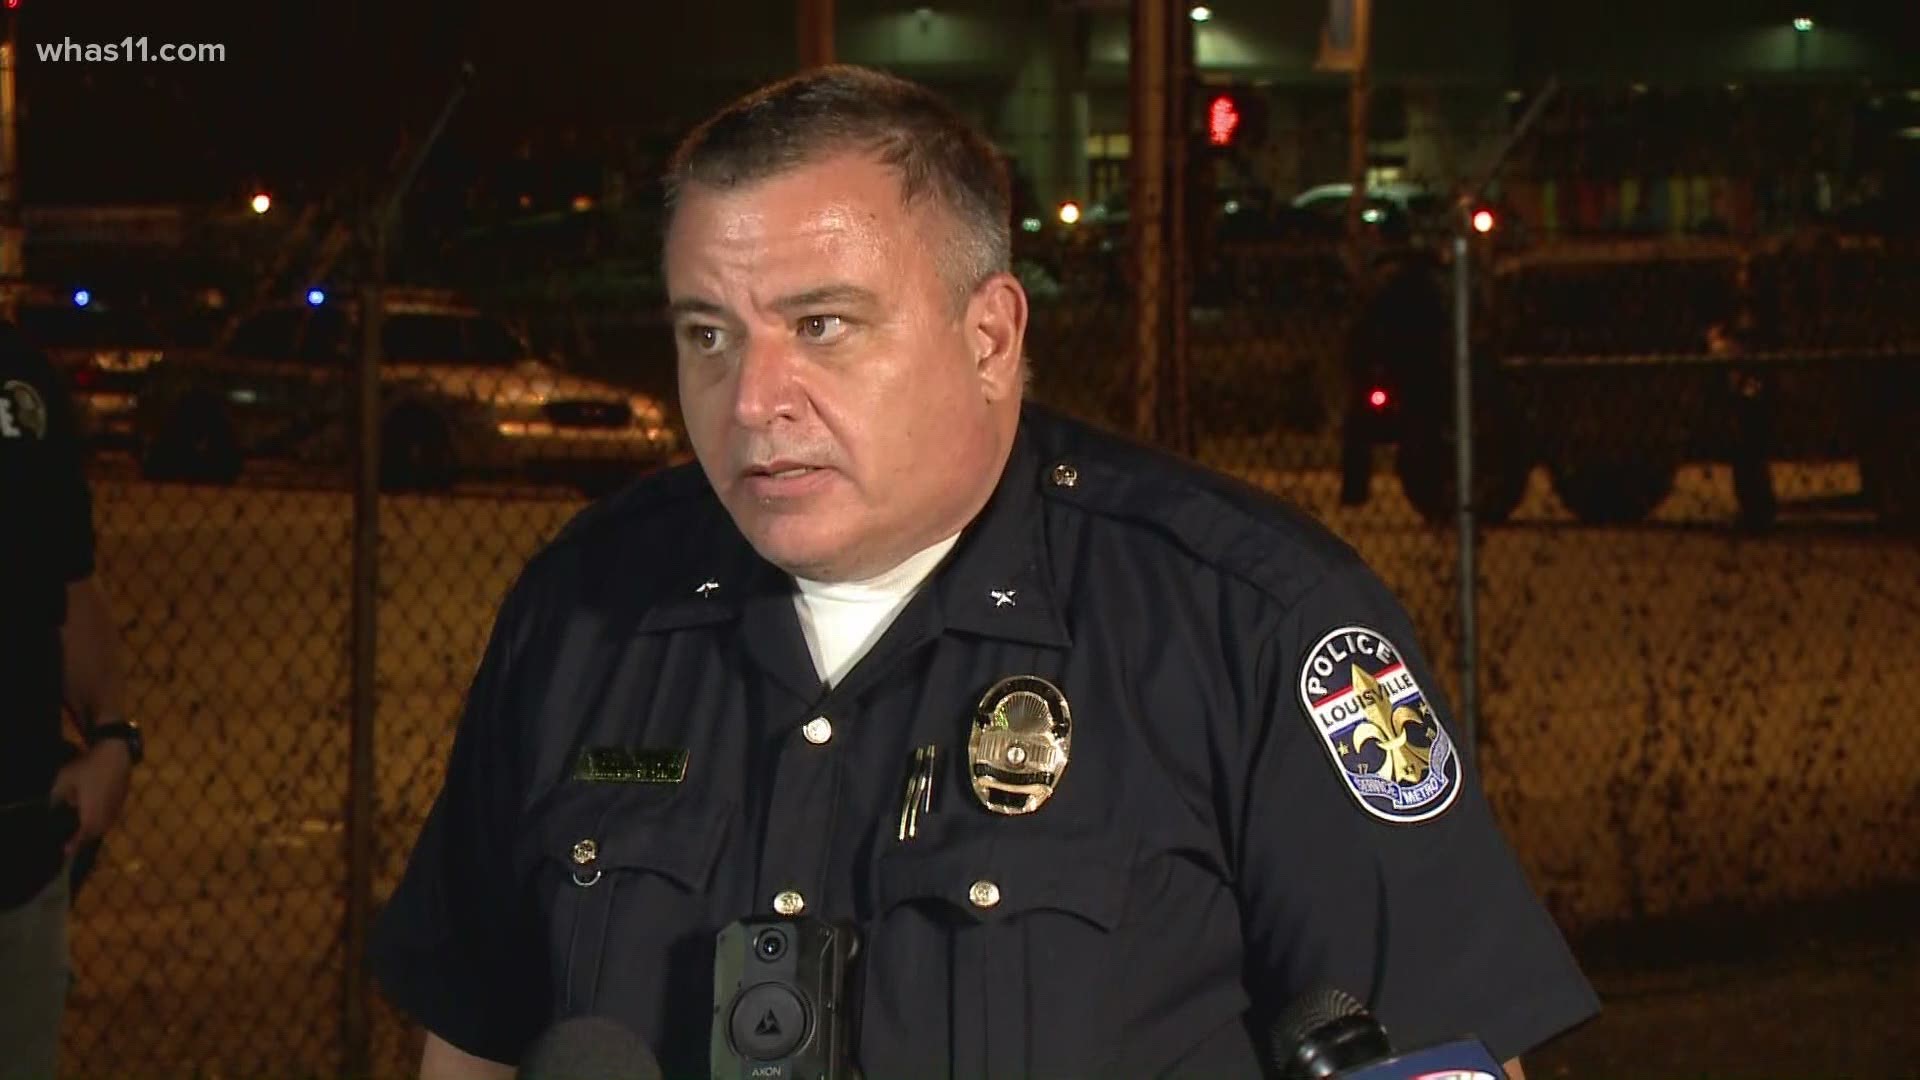 Louisville police provided an update after two officers were shot Wednesday night. The Breonna Taylor decision was announced earlier in the day.